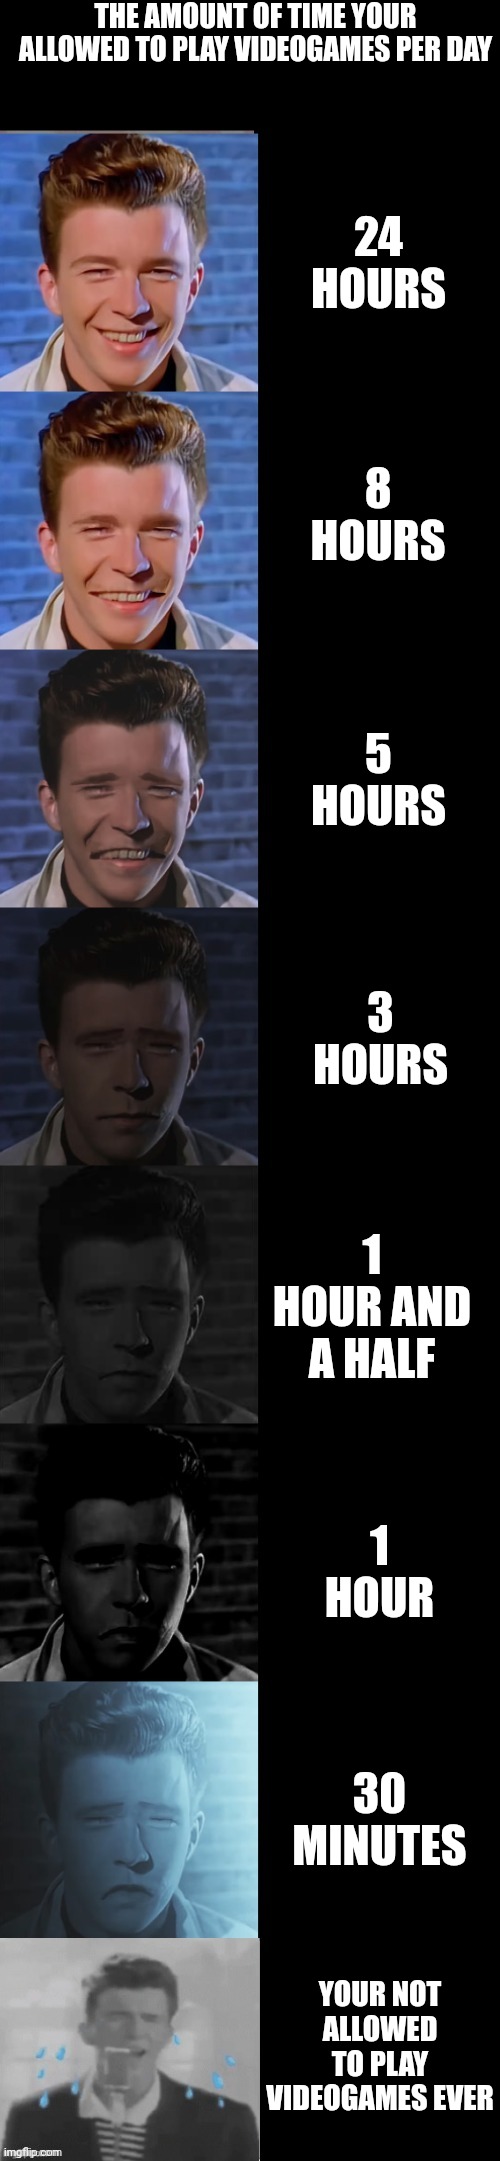 Rick Astley Becoming Sad True Form | THE AMOUNT OF TIME YOUR ALLOWED TO PLAY VIDEOGAMES PER DAY; 24 HOURS; 8 HOURS; 5 HOURS; 3 HOURS; 1 HOUR AND A HALF; 1 HOUR; 30 MINUTES; YOUR NOT ALLOWED TO PLAY VIDEOGAMES EVER | image tagged in rick astley becoming sad true form | made w/ Imgflip meme maker